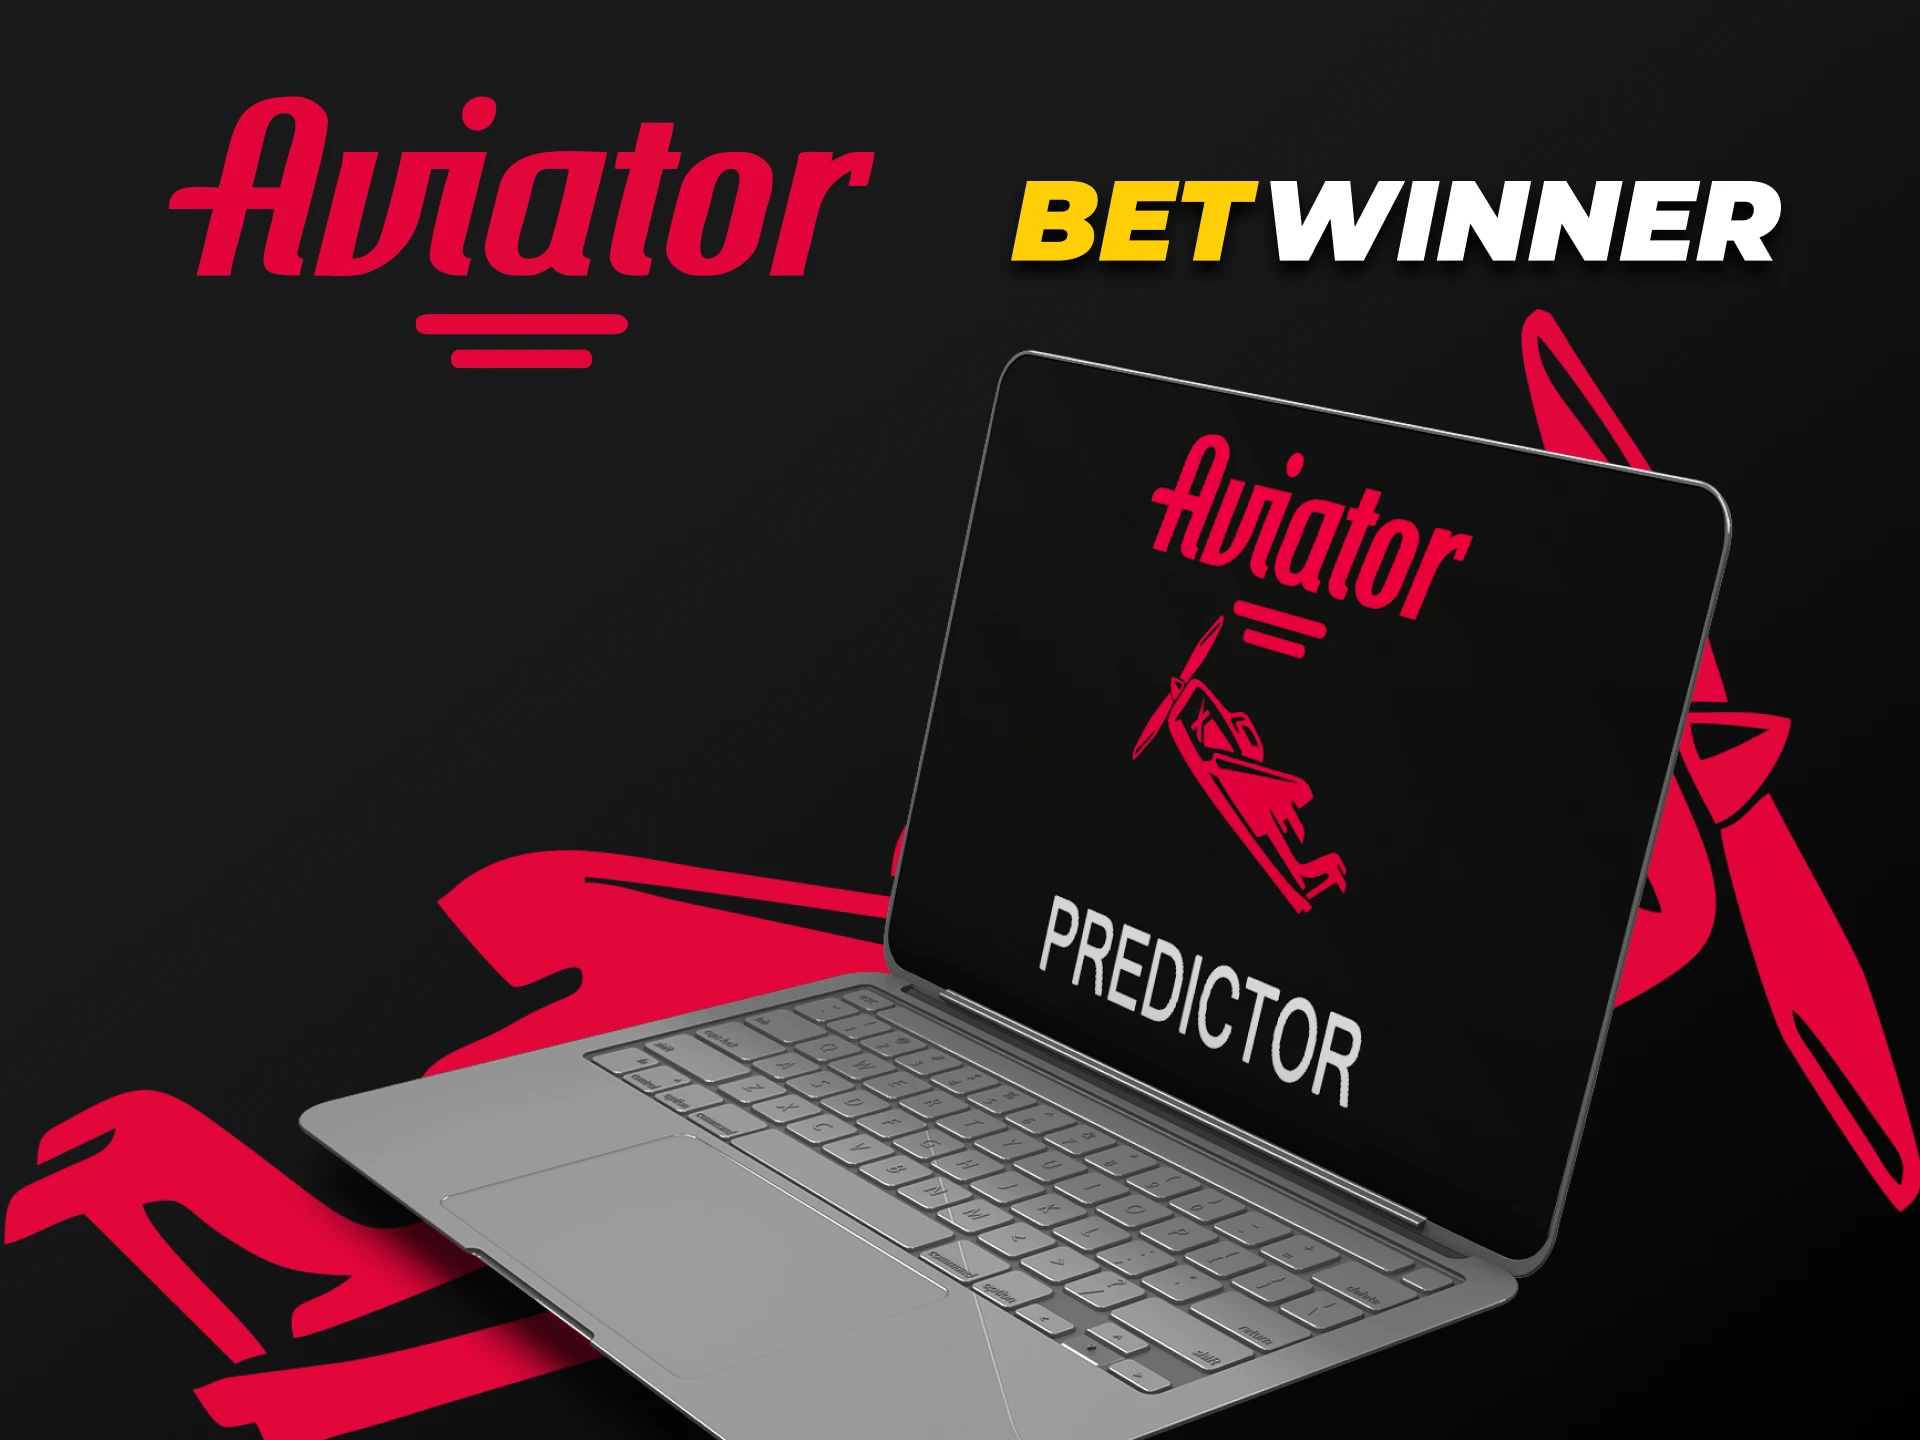 Use the Predictor on the Betwinner website for Aviator.